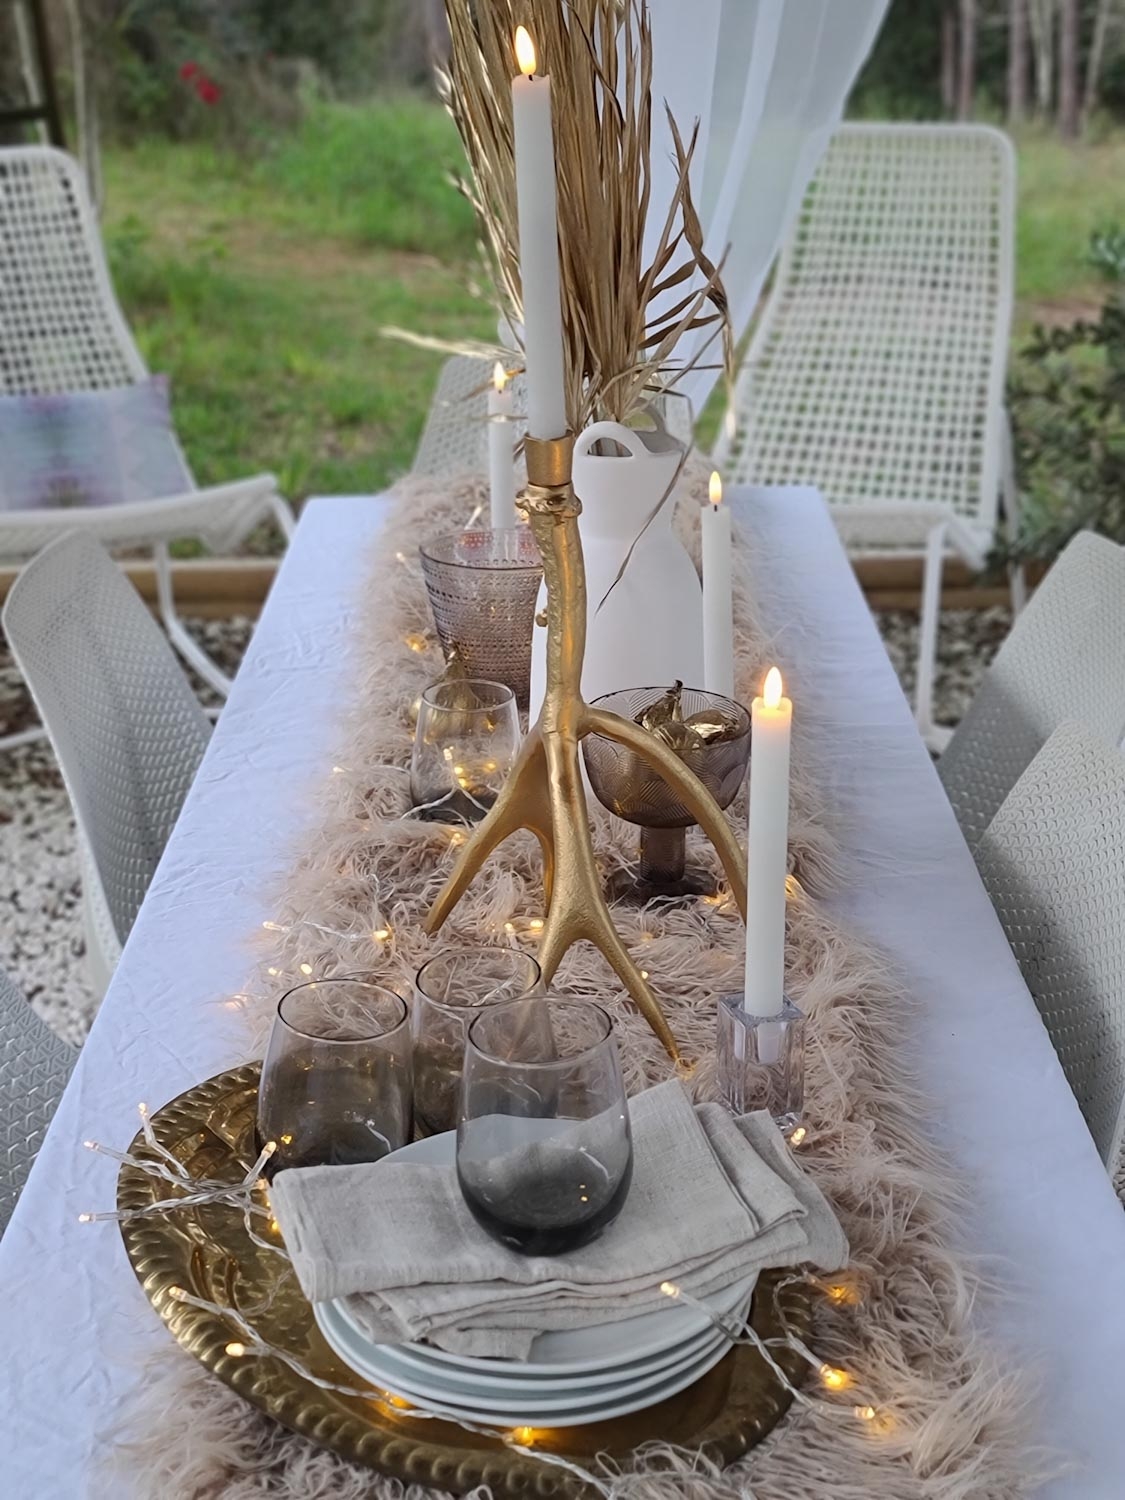 Cozy White Winter Outdoors Bed Bath & Beyond Firepit Dining Candles Tablescape Tablesetting Scandinavian Modern Farmhouse Fur Antlers Gold White Twinkle Lights Beautiful Country living Lounge Area Garden Sparkle Design Decor Styling Wonderland